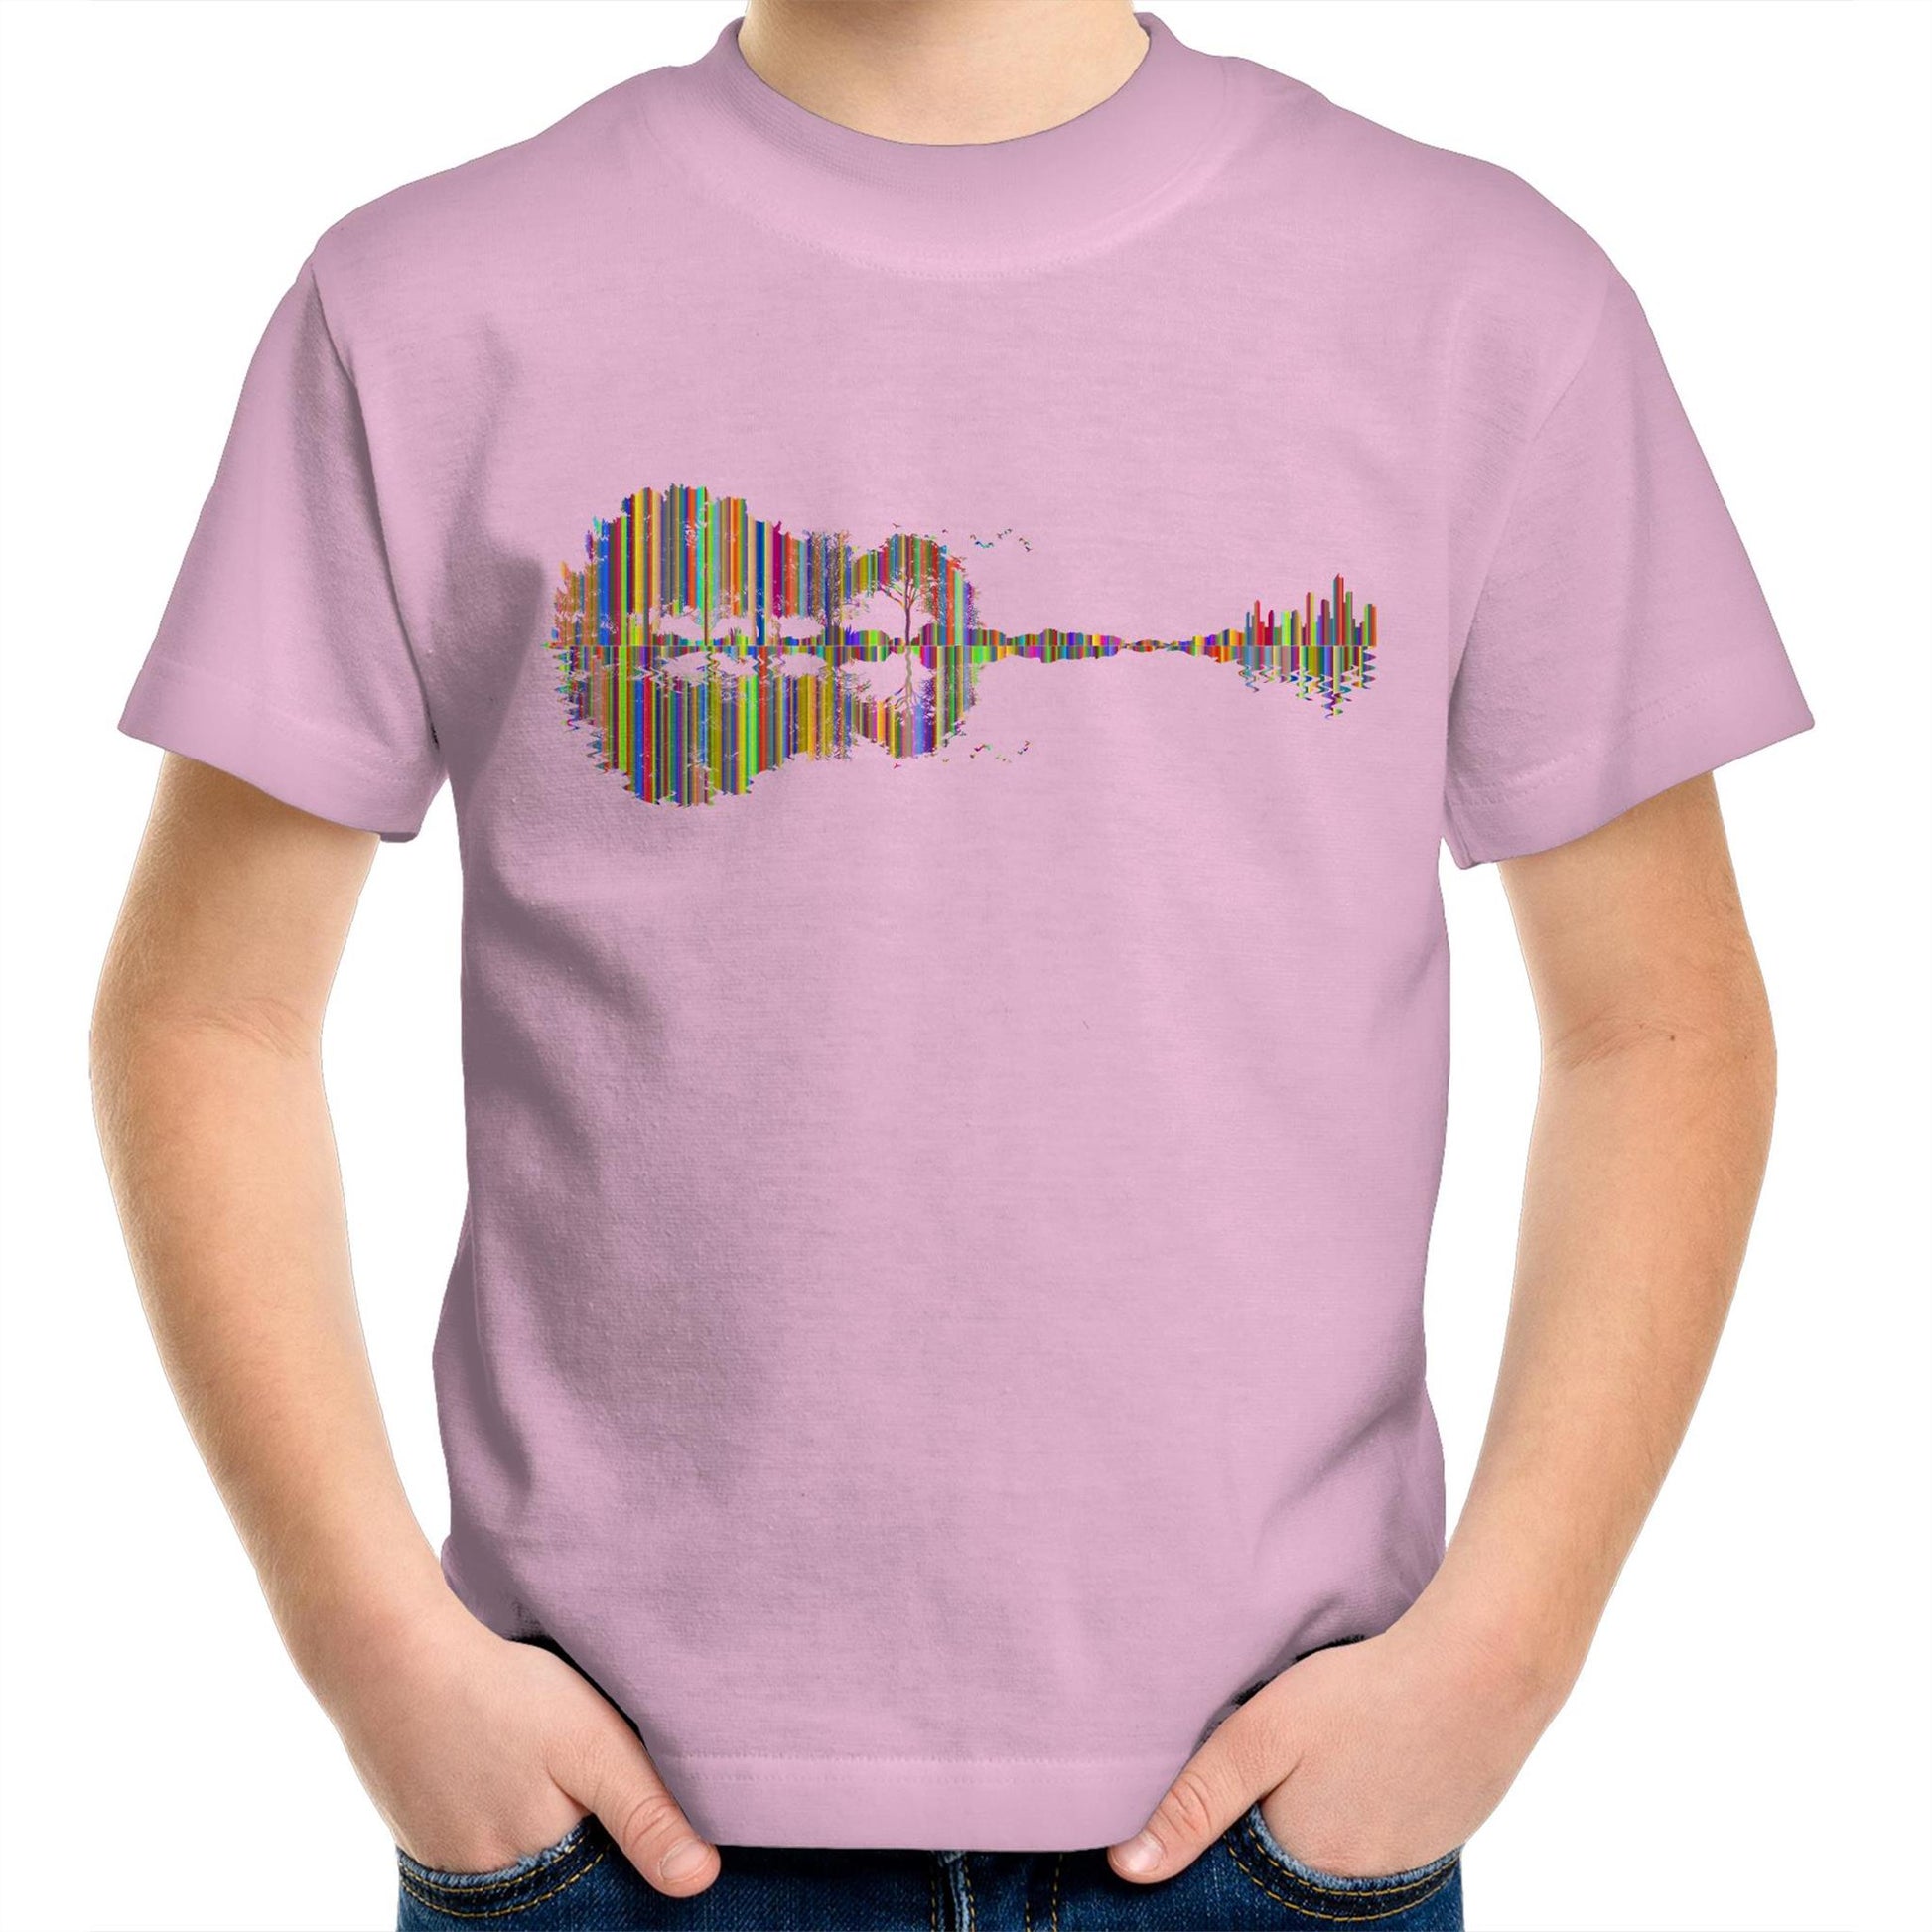 Guitar Reflection In Colour - Kids Youth Crew T-Shirt Pink Kids Youth T-shirt Music